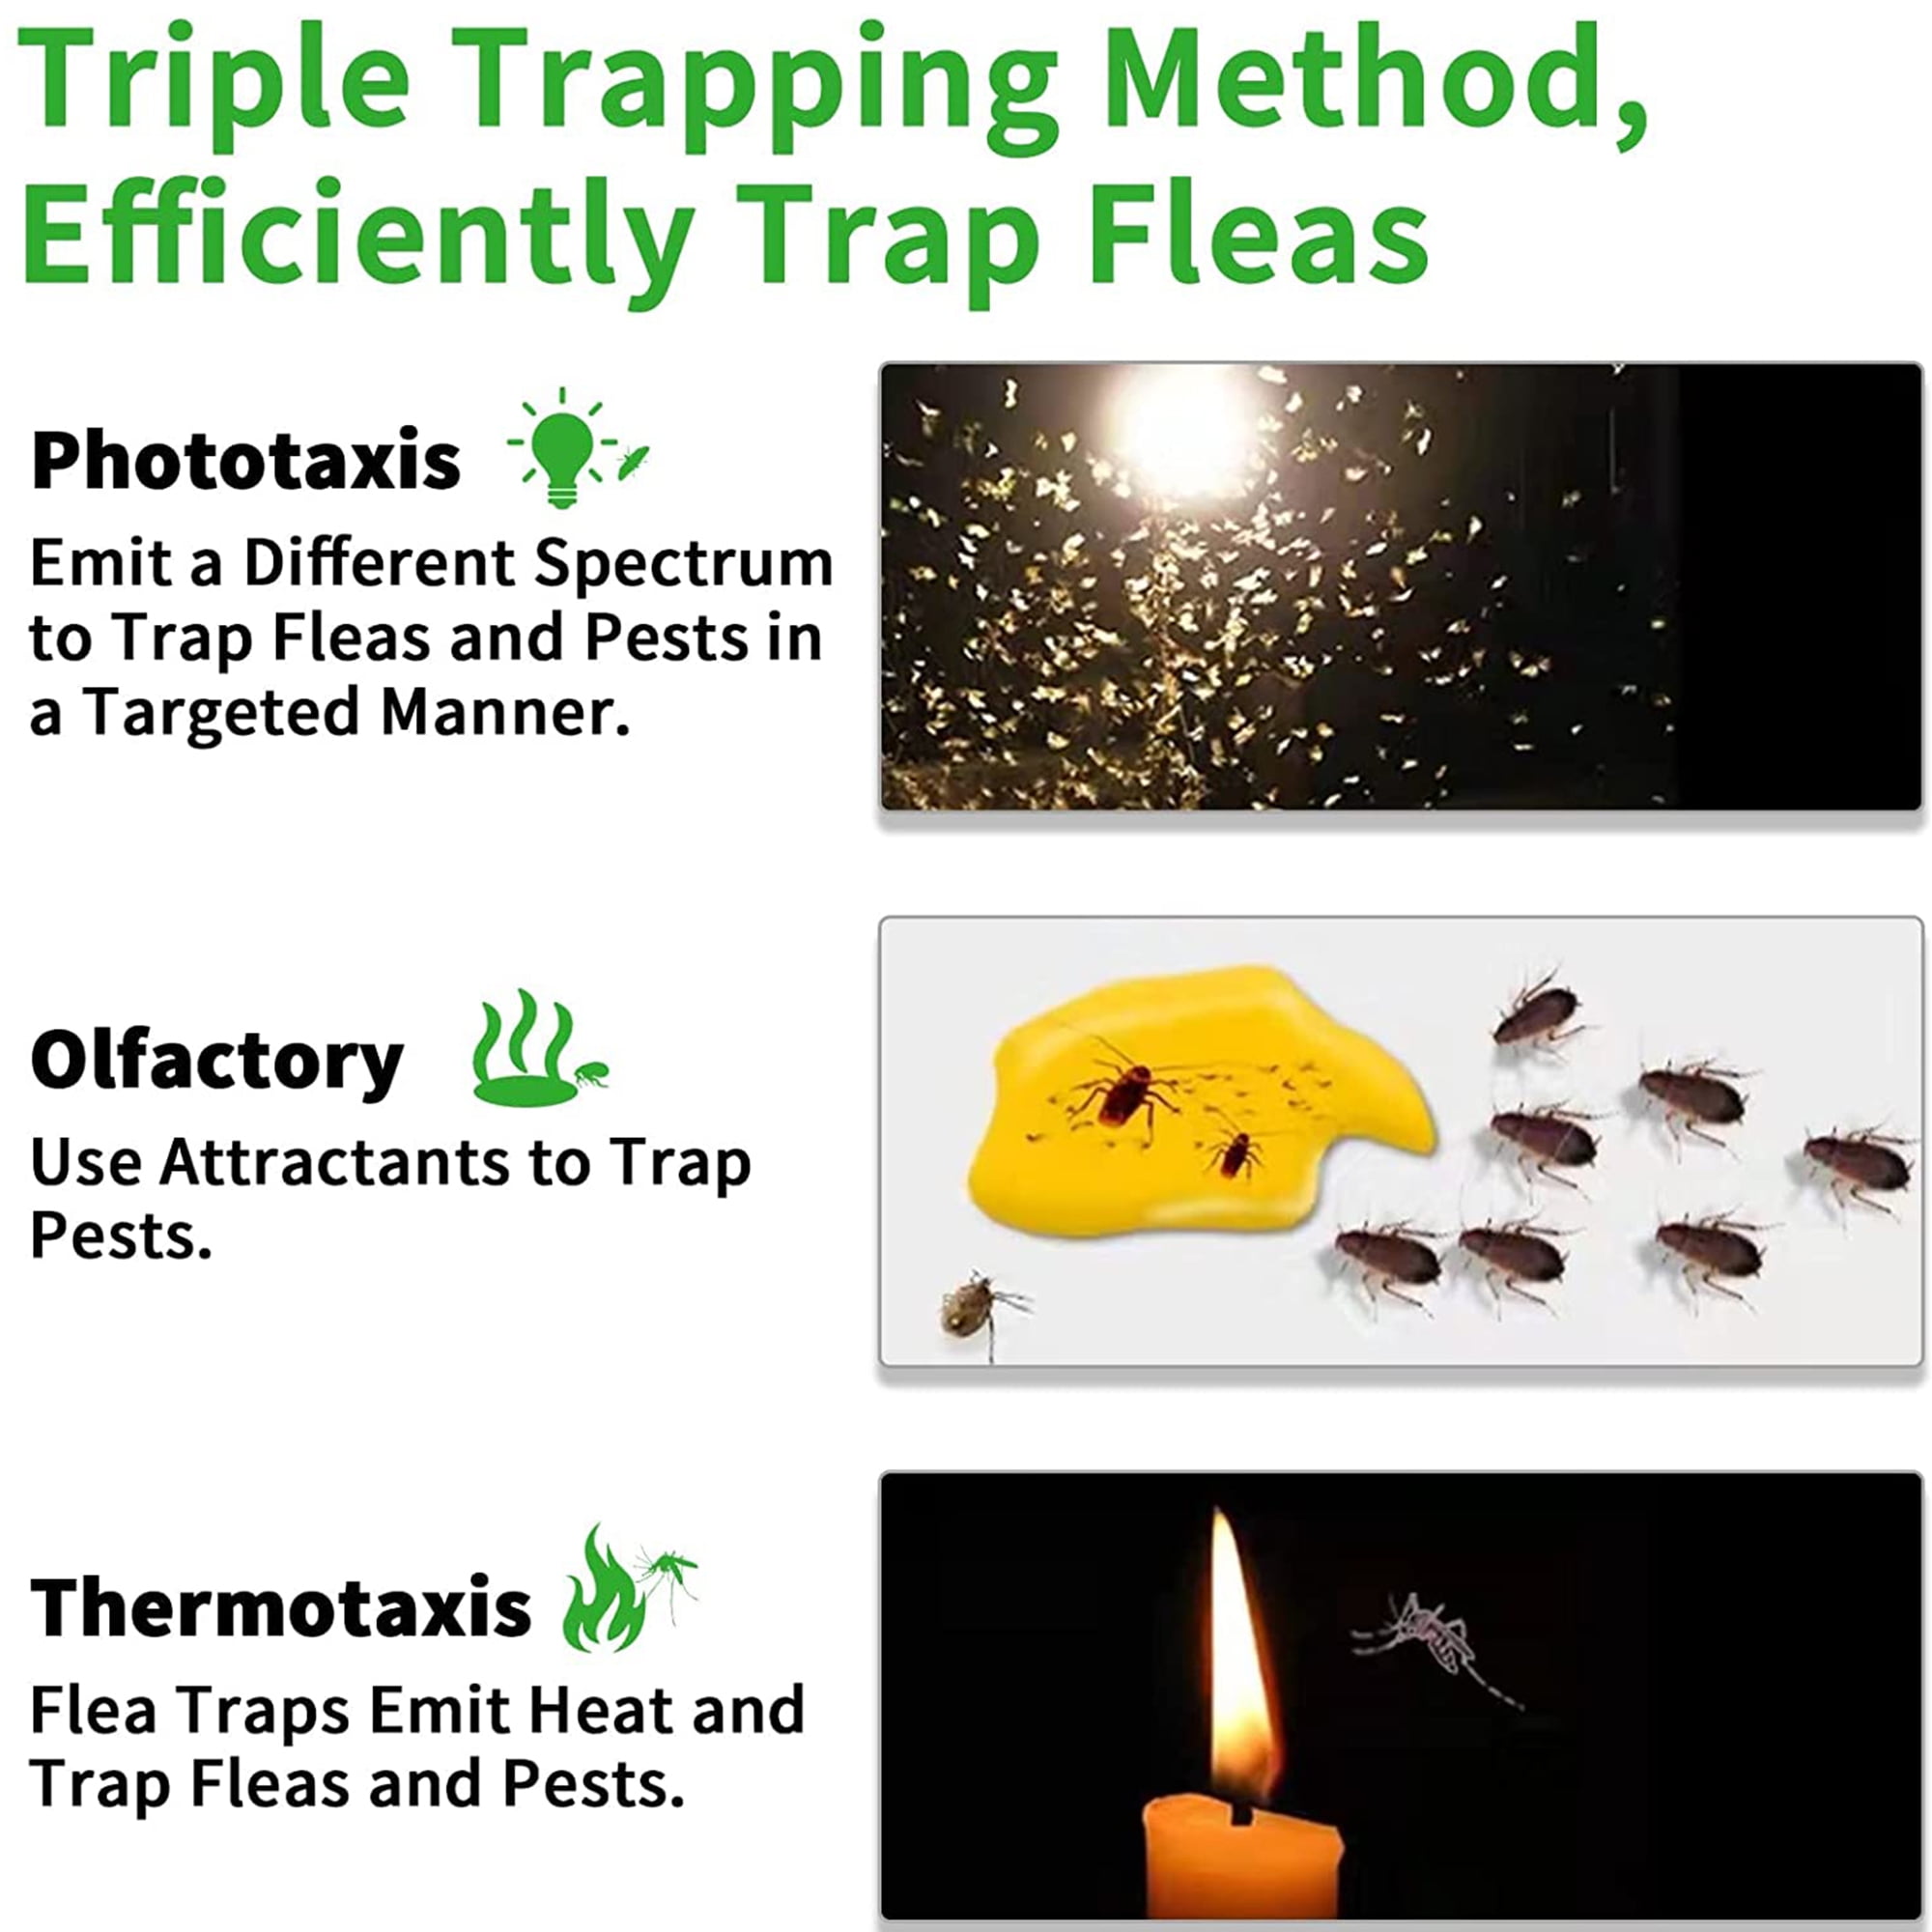 Sticky Dome Bed Bug Insects,Indoor Pest Control Trapper Natural Insect Killer Pad with Sticky Pads and Light Bulbs for Bugs Fleas 1p flea trap Protecker Flea Trap Non-Toxic Odorless 2 Pack 